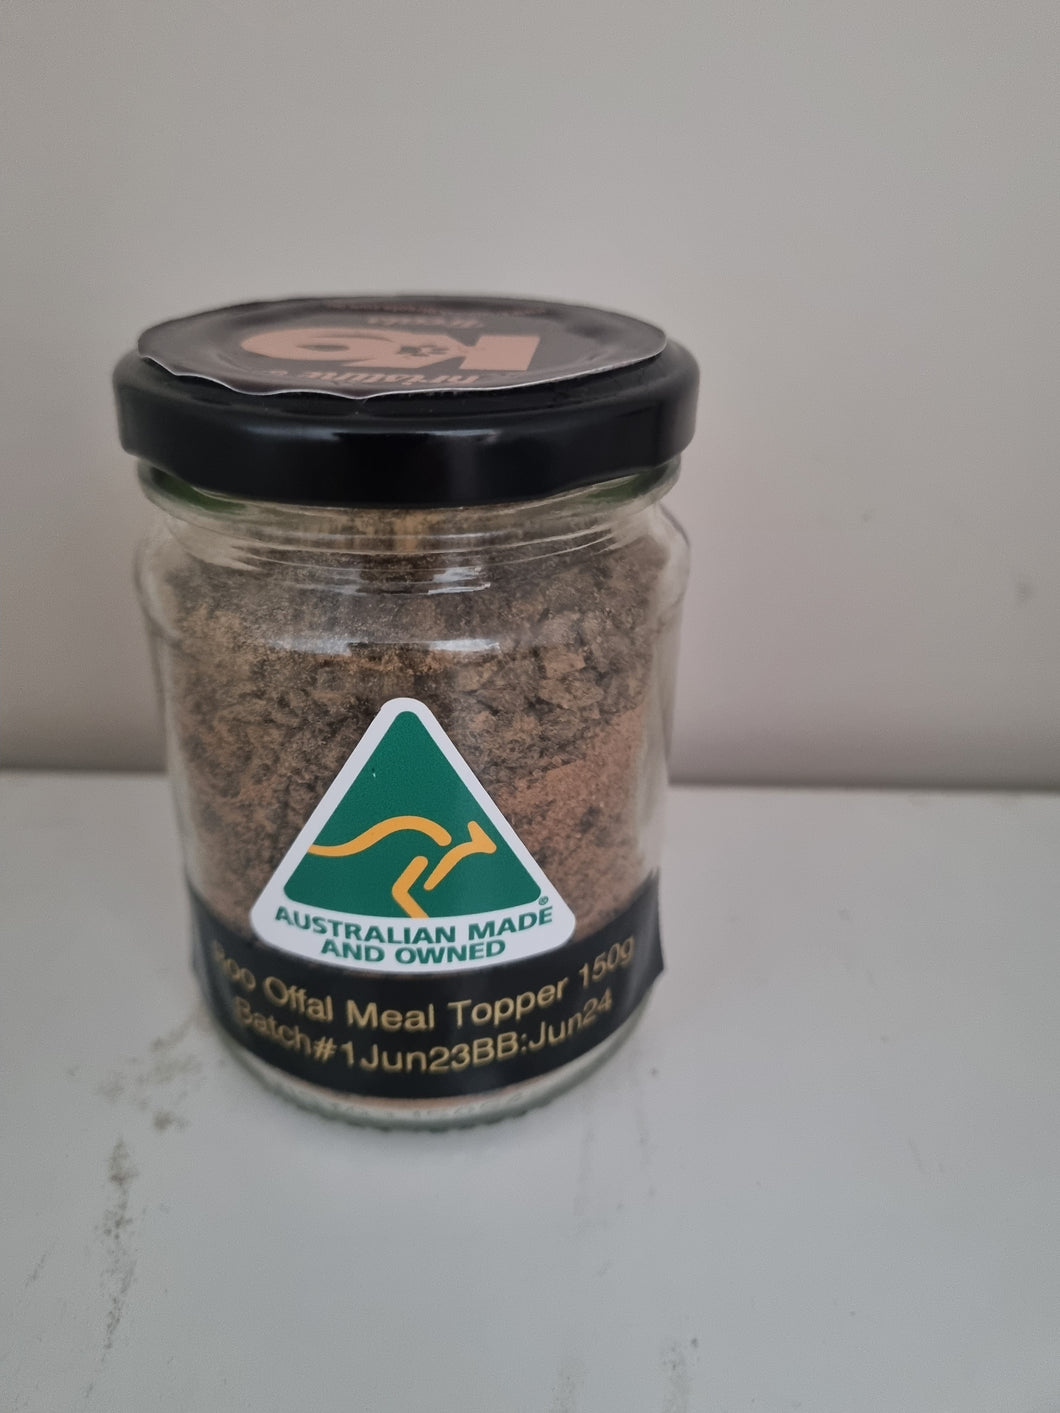 Roo Offal Meal Topper Clearance